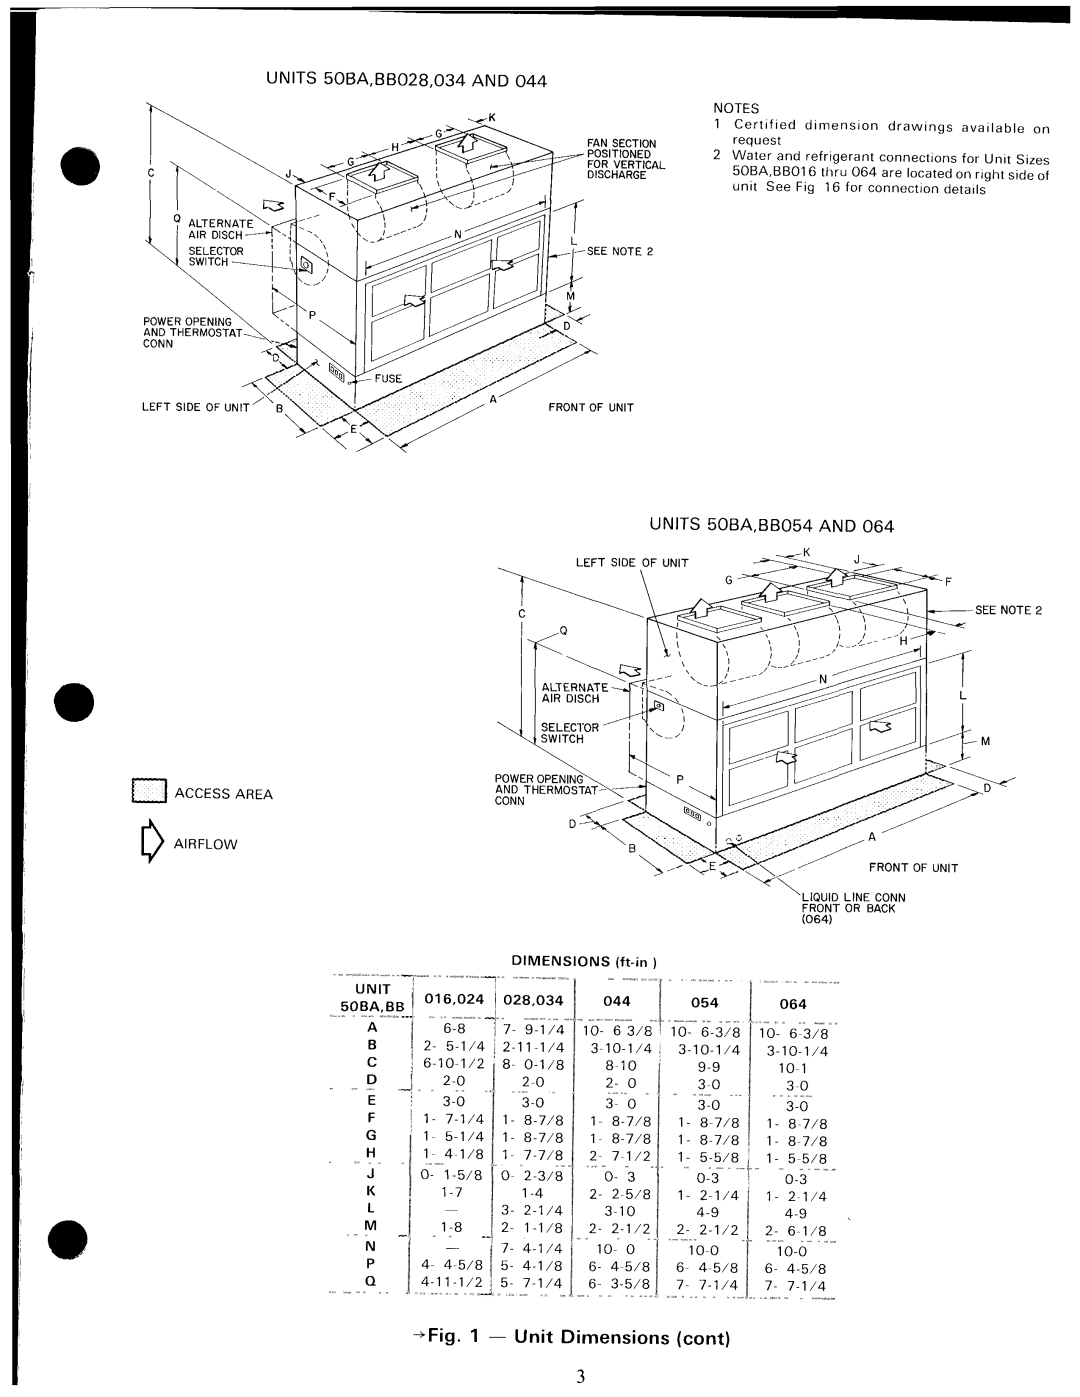 Carrier BB manual 